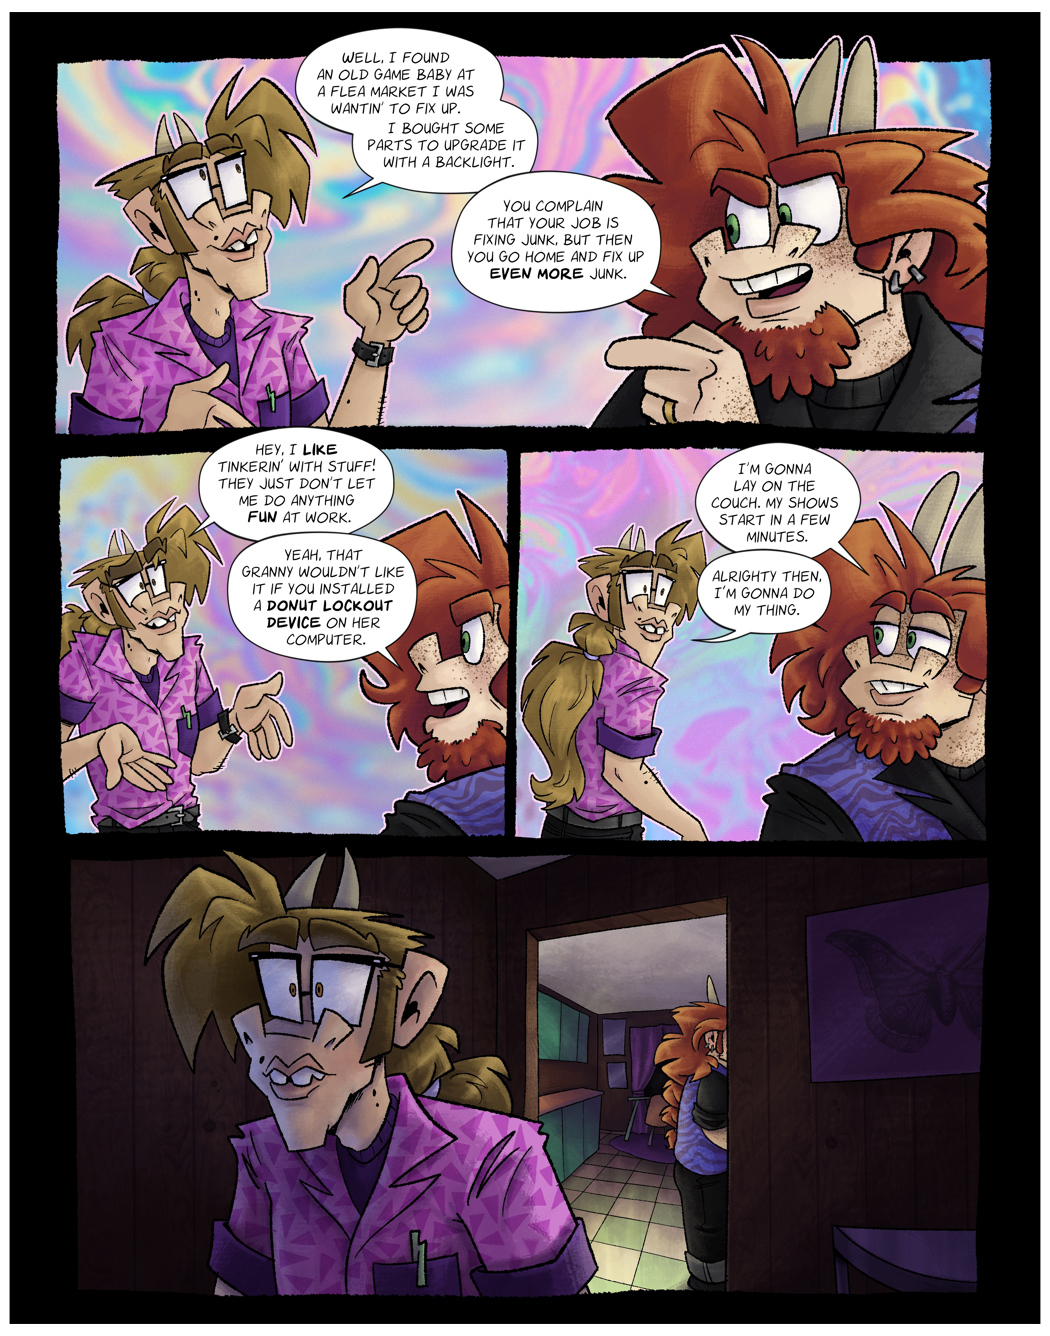 Chapter 3 Page 23: Hobbies